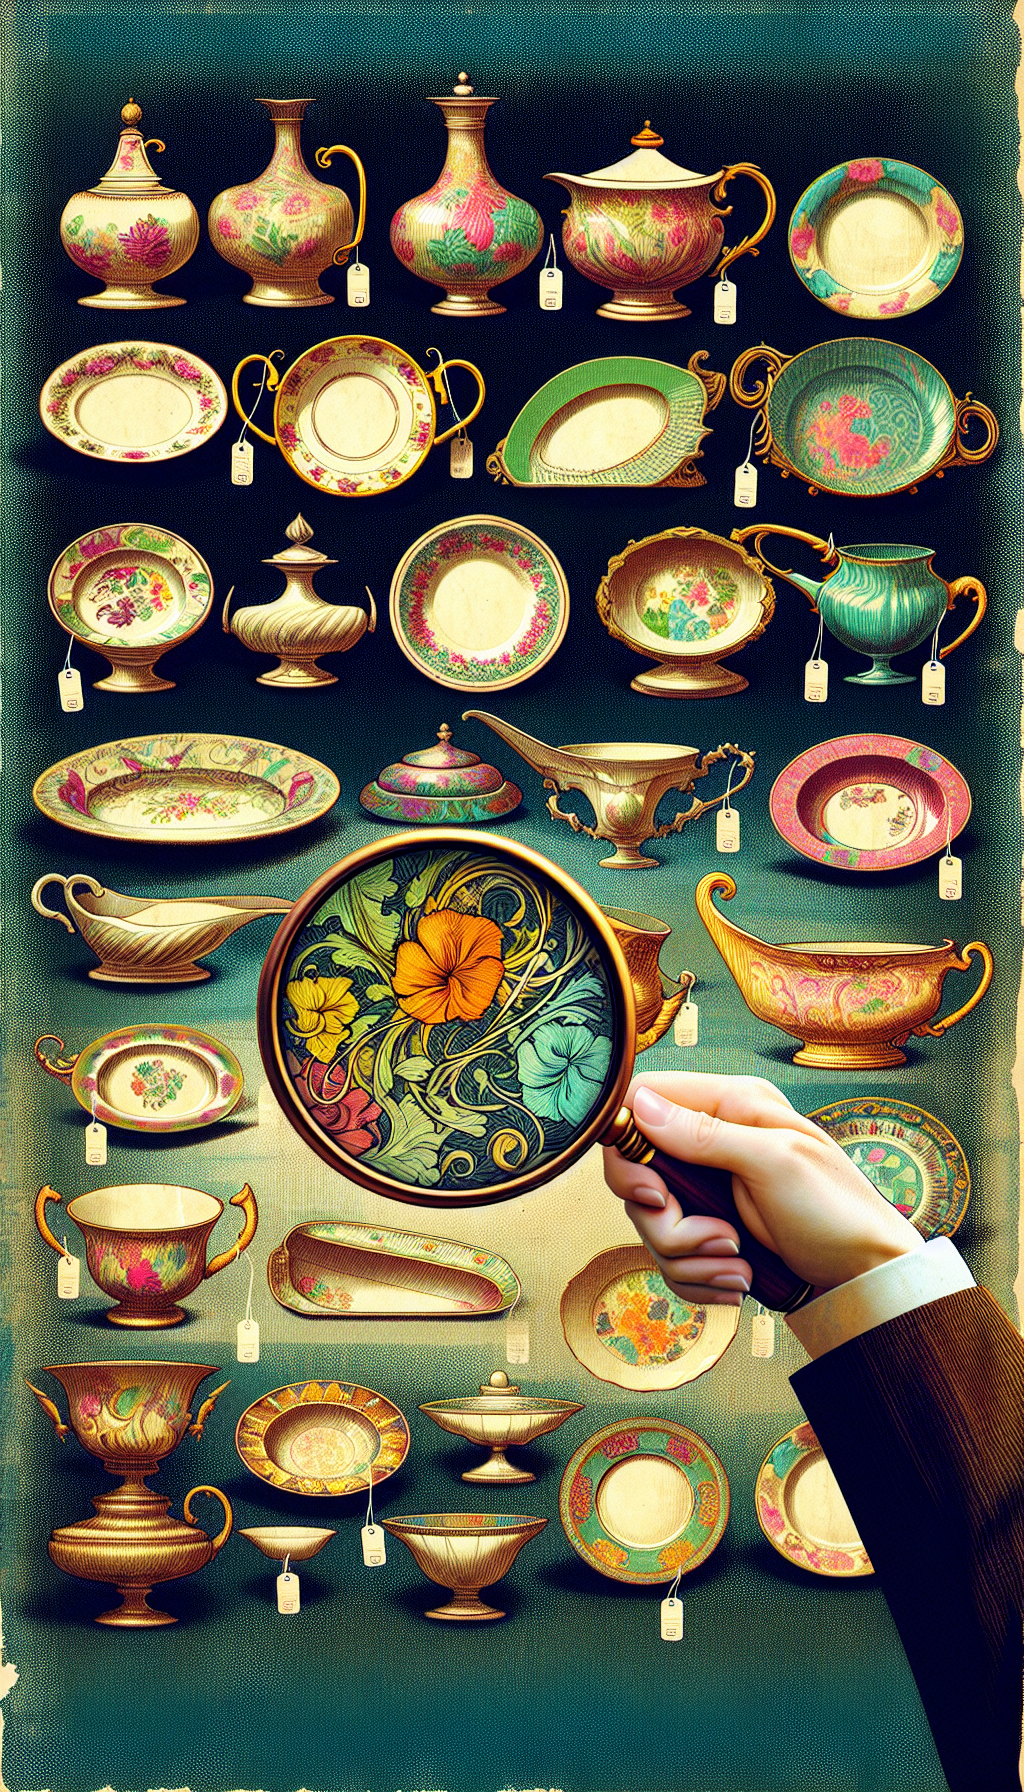 An elegant hand with a magnifying glass examines a rich tapestry of antique dishes, each sketch in a different style: Art Nouveau curves, Art Deco sharpness, Victorian flourishes, and Baroque ornamentation. The dishes gleam, subtly transitioning in color to gold at the edges, symbolizing their value, while a faint watermark of a price tag overlays the corner, hinting at their appraised worth.